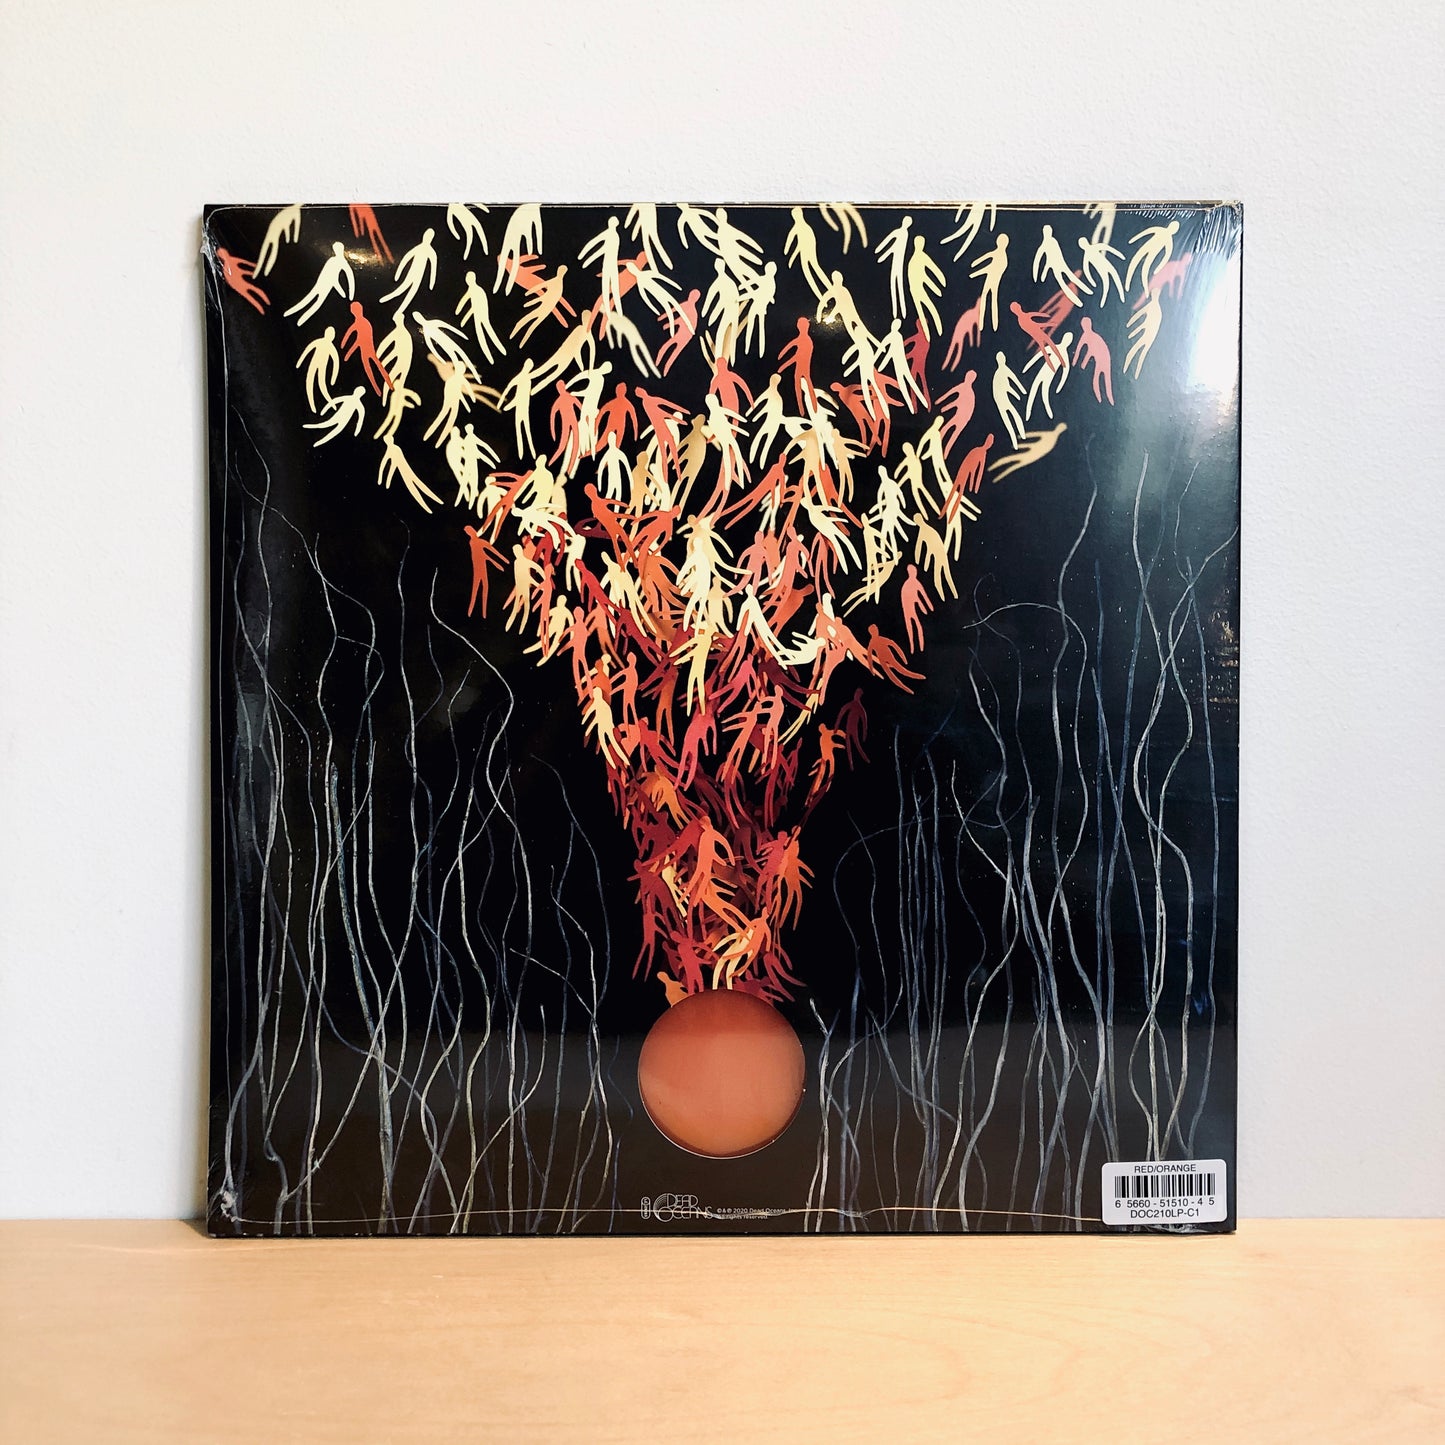 Bright Eyes - Down In The Weeds Where The World Once Was. 2LP [Transparent Red/Orange Vinyl]